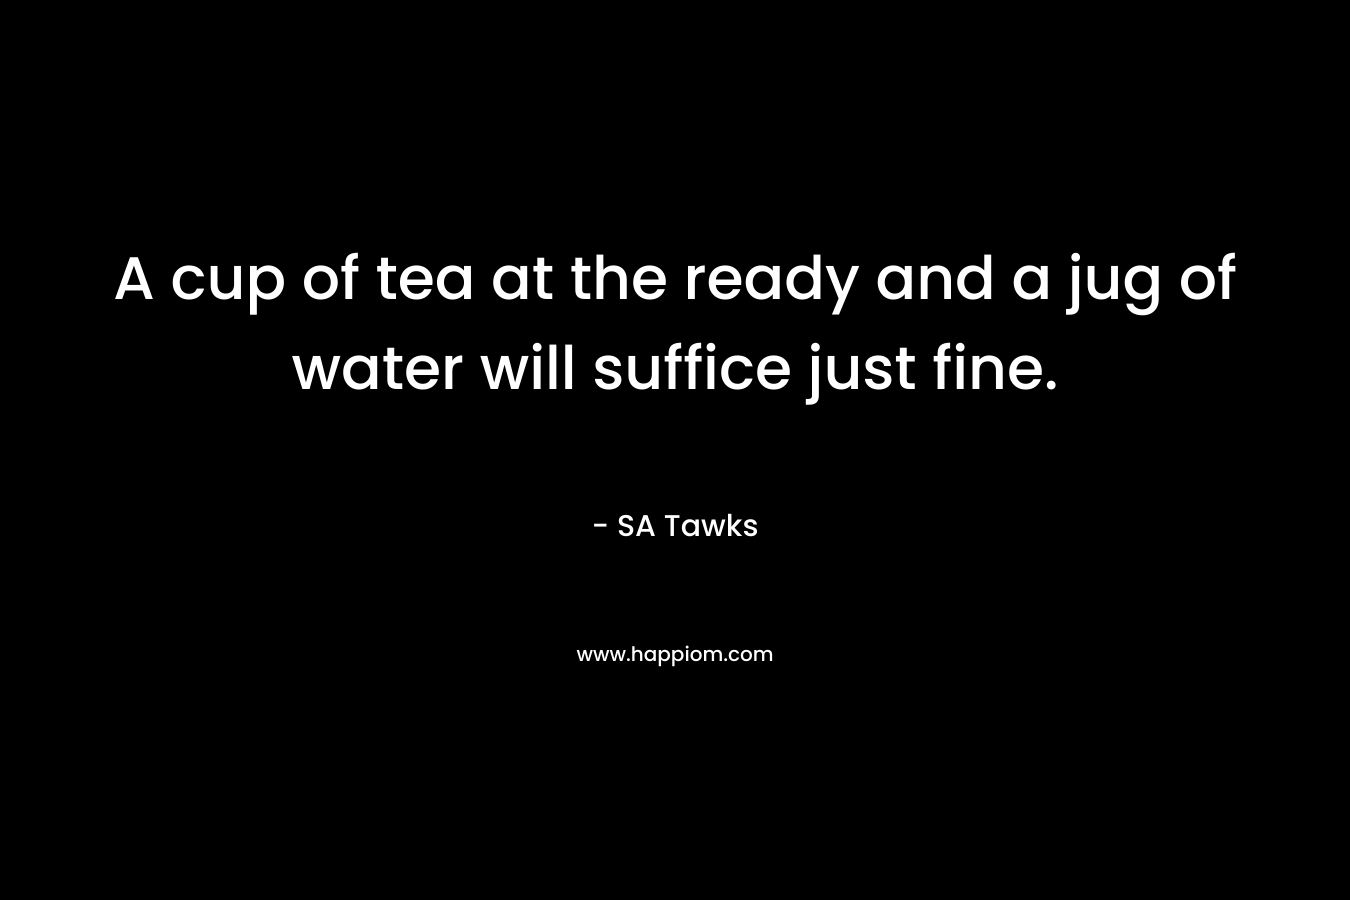 A cup of tea at the ready and a jug of water will suffice just fine. – SA Tawks